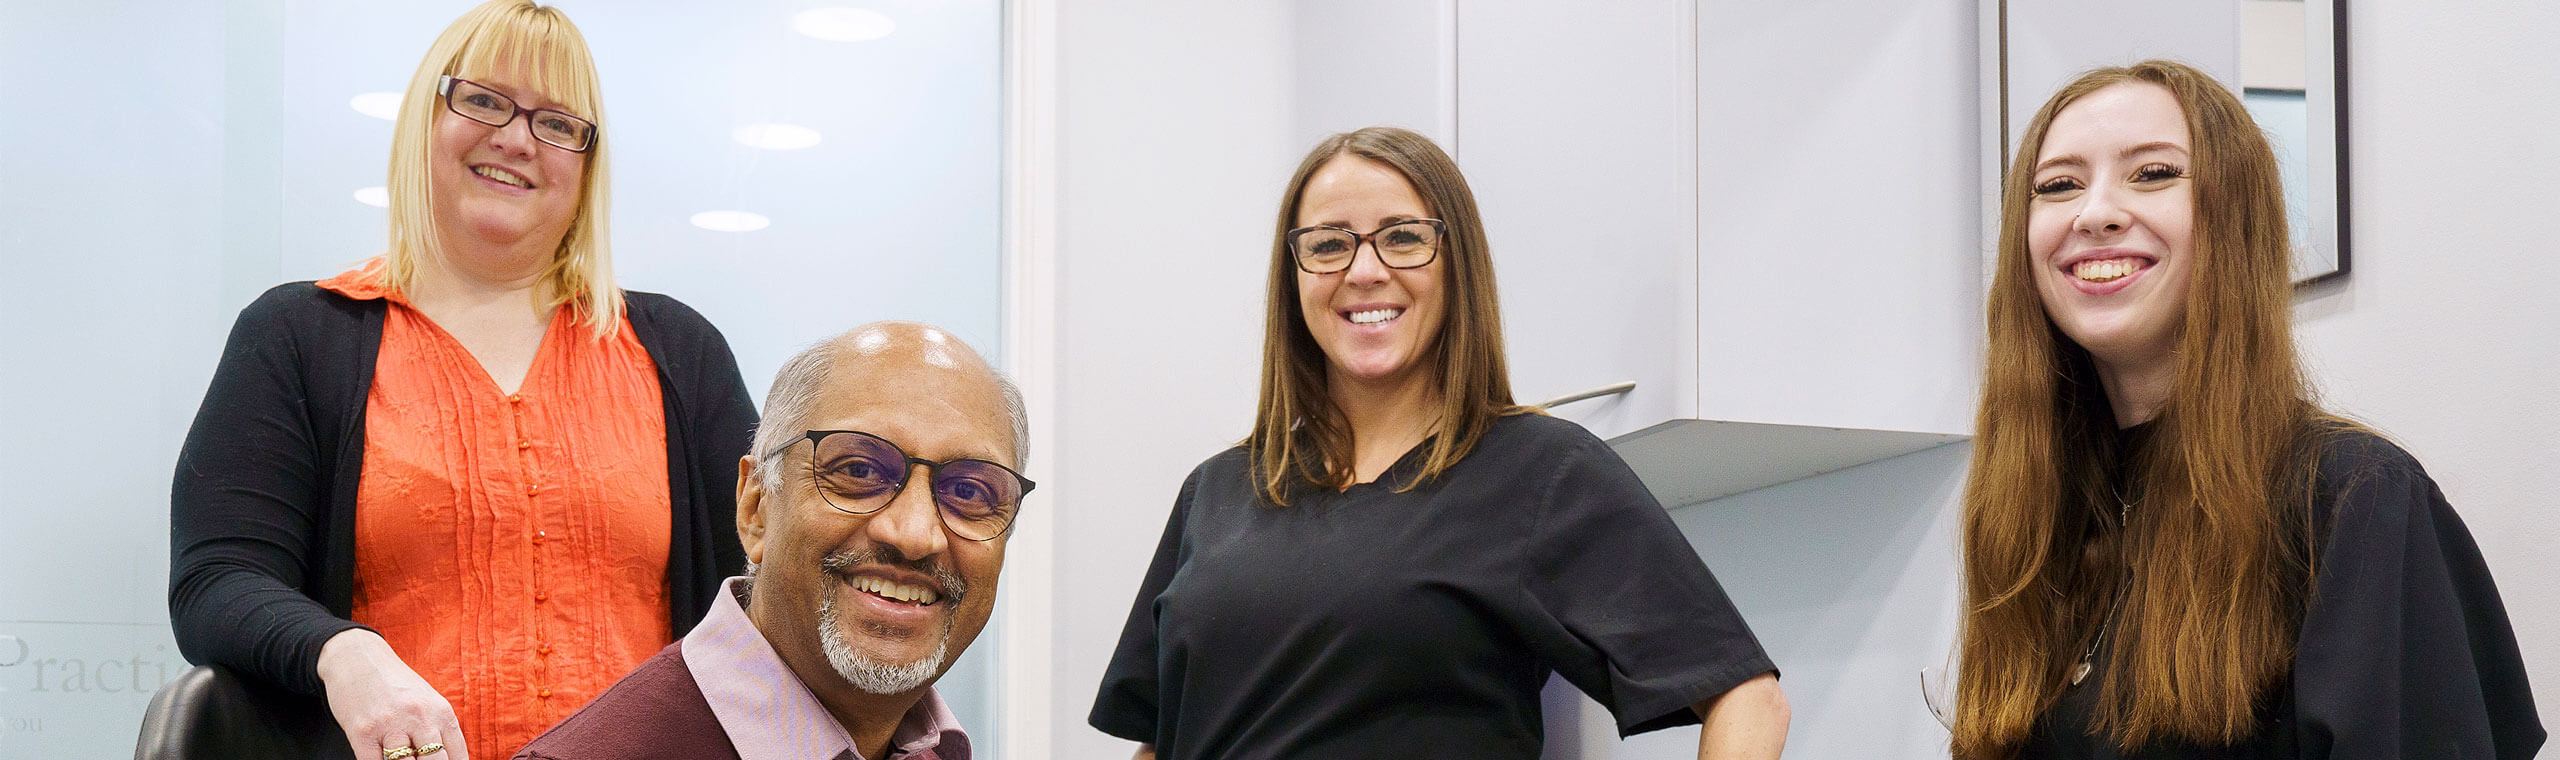 About Us | Oxley Park Dental Practice in Milton Keynes